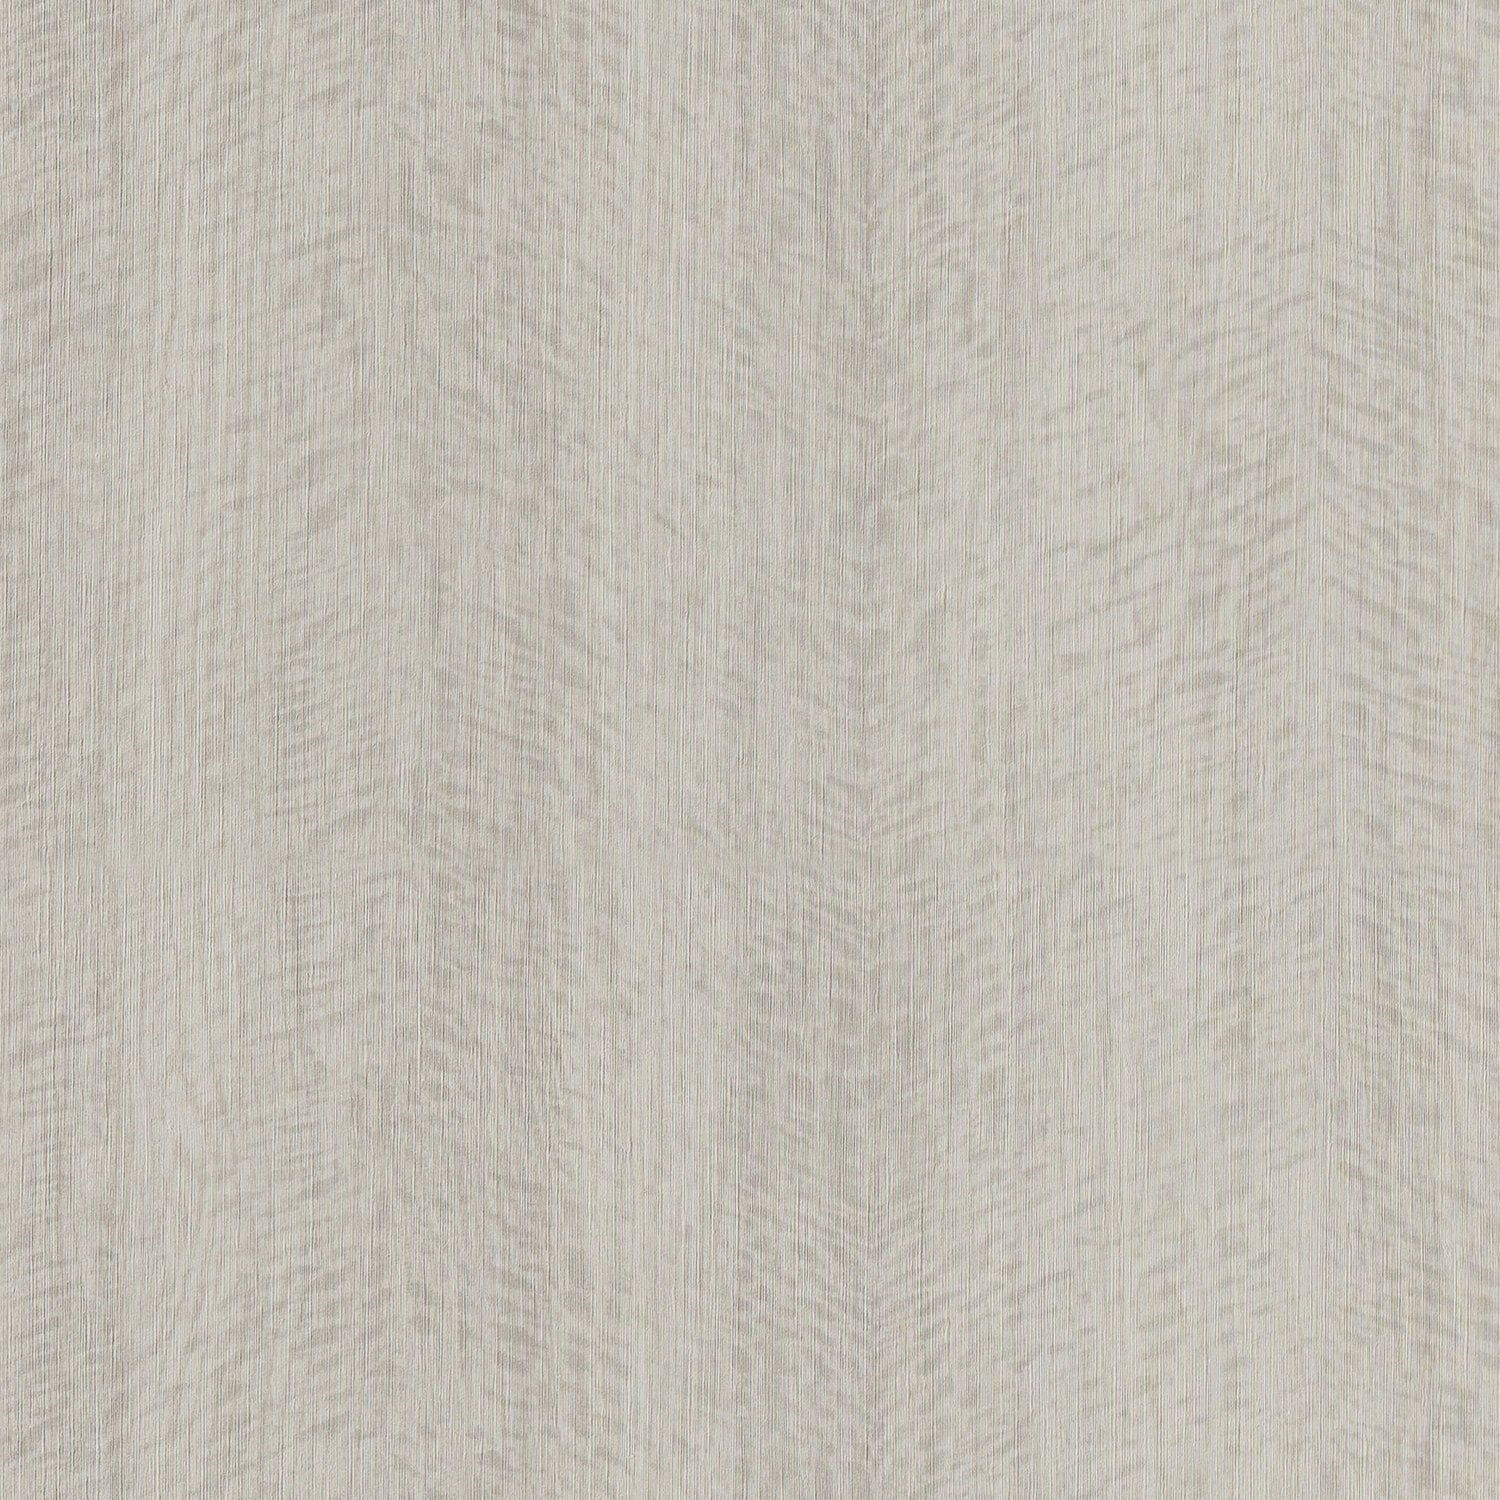 Woodn't It Be Nice - Y47871 - Wallcovering - Vycon - Kube Contract